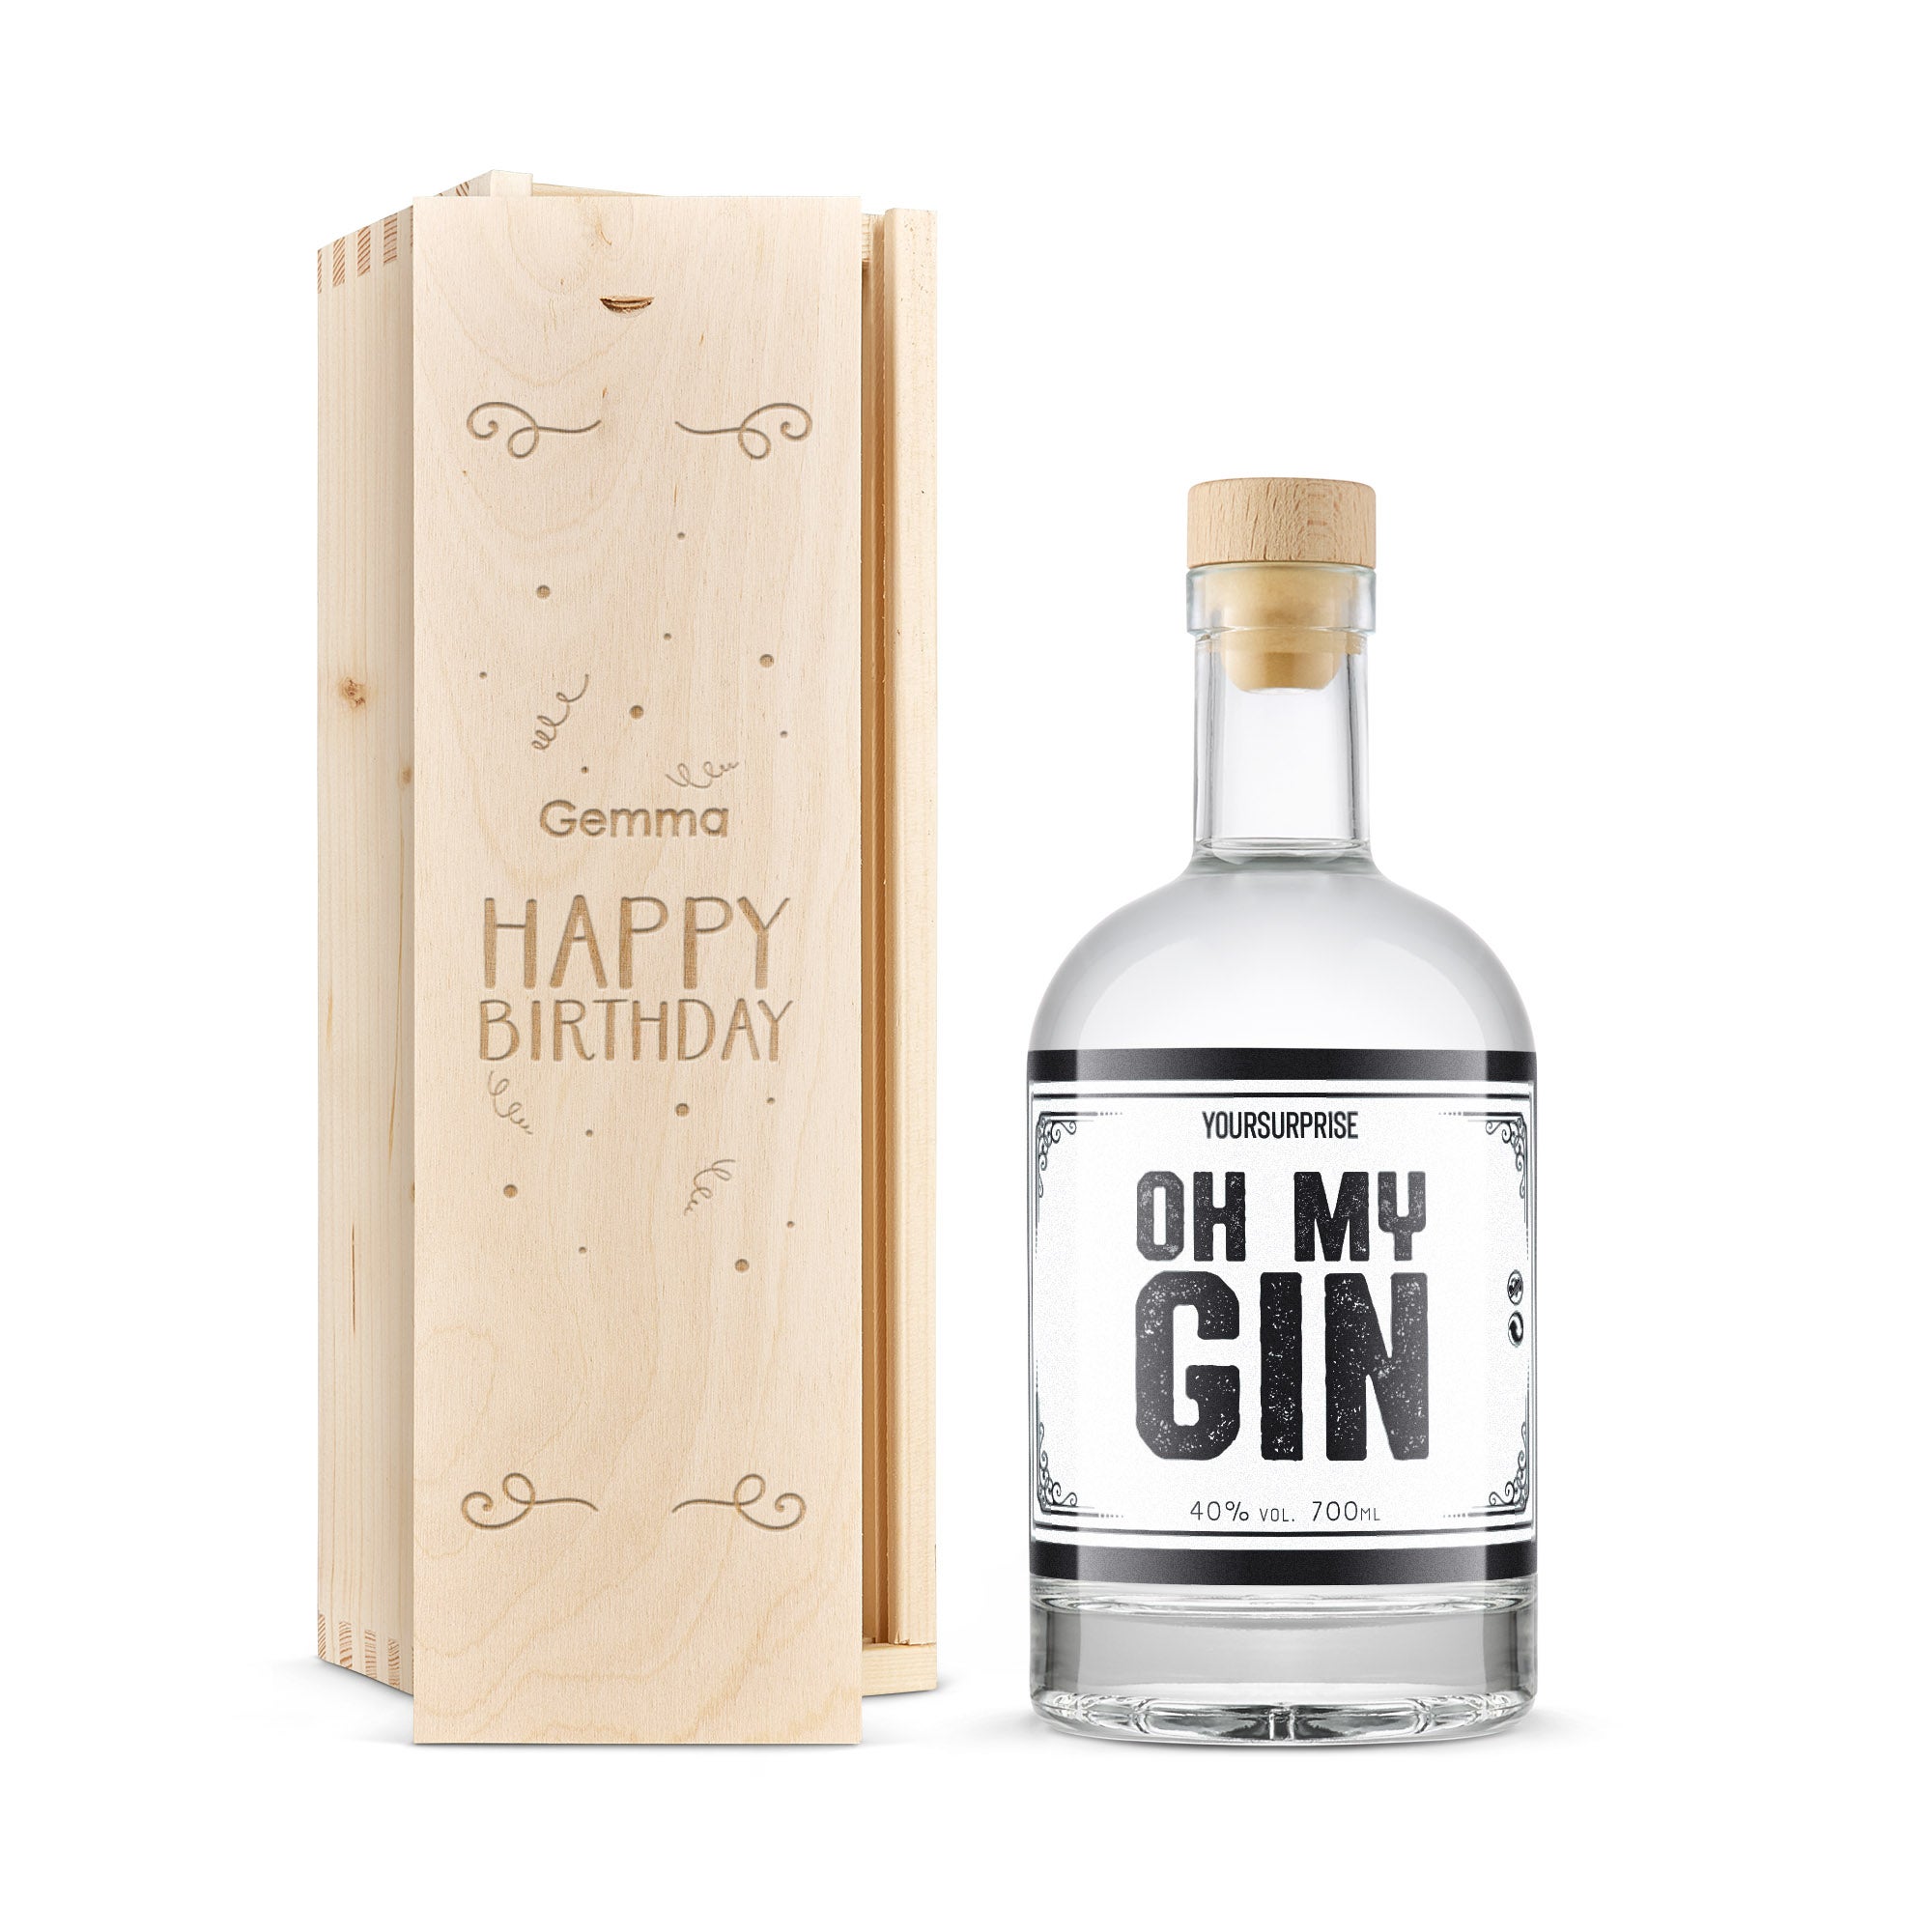 Personalised gin gift - YourSurprise - Engraved wooden case